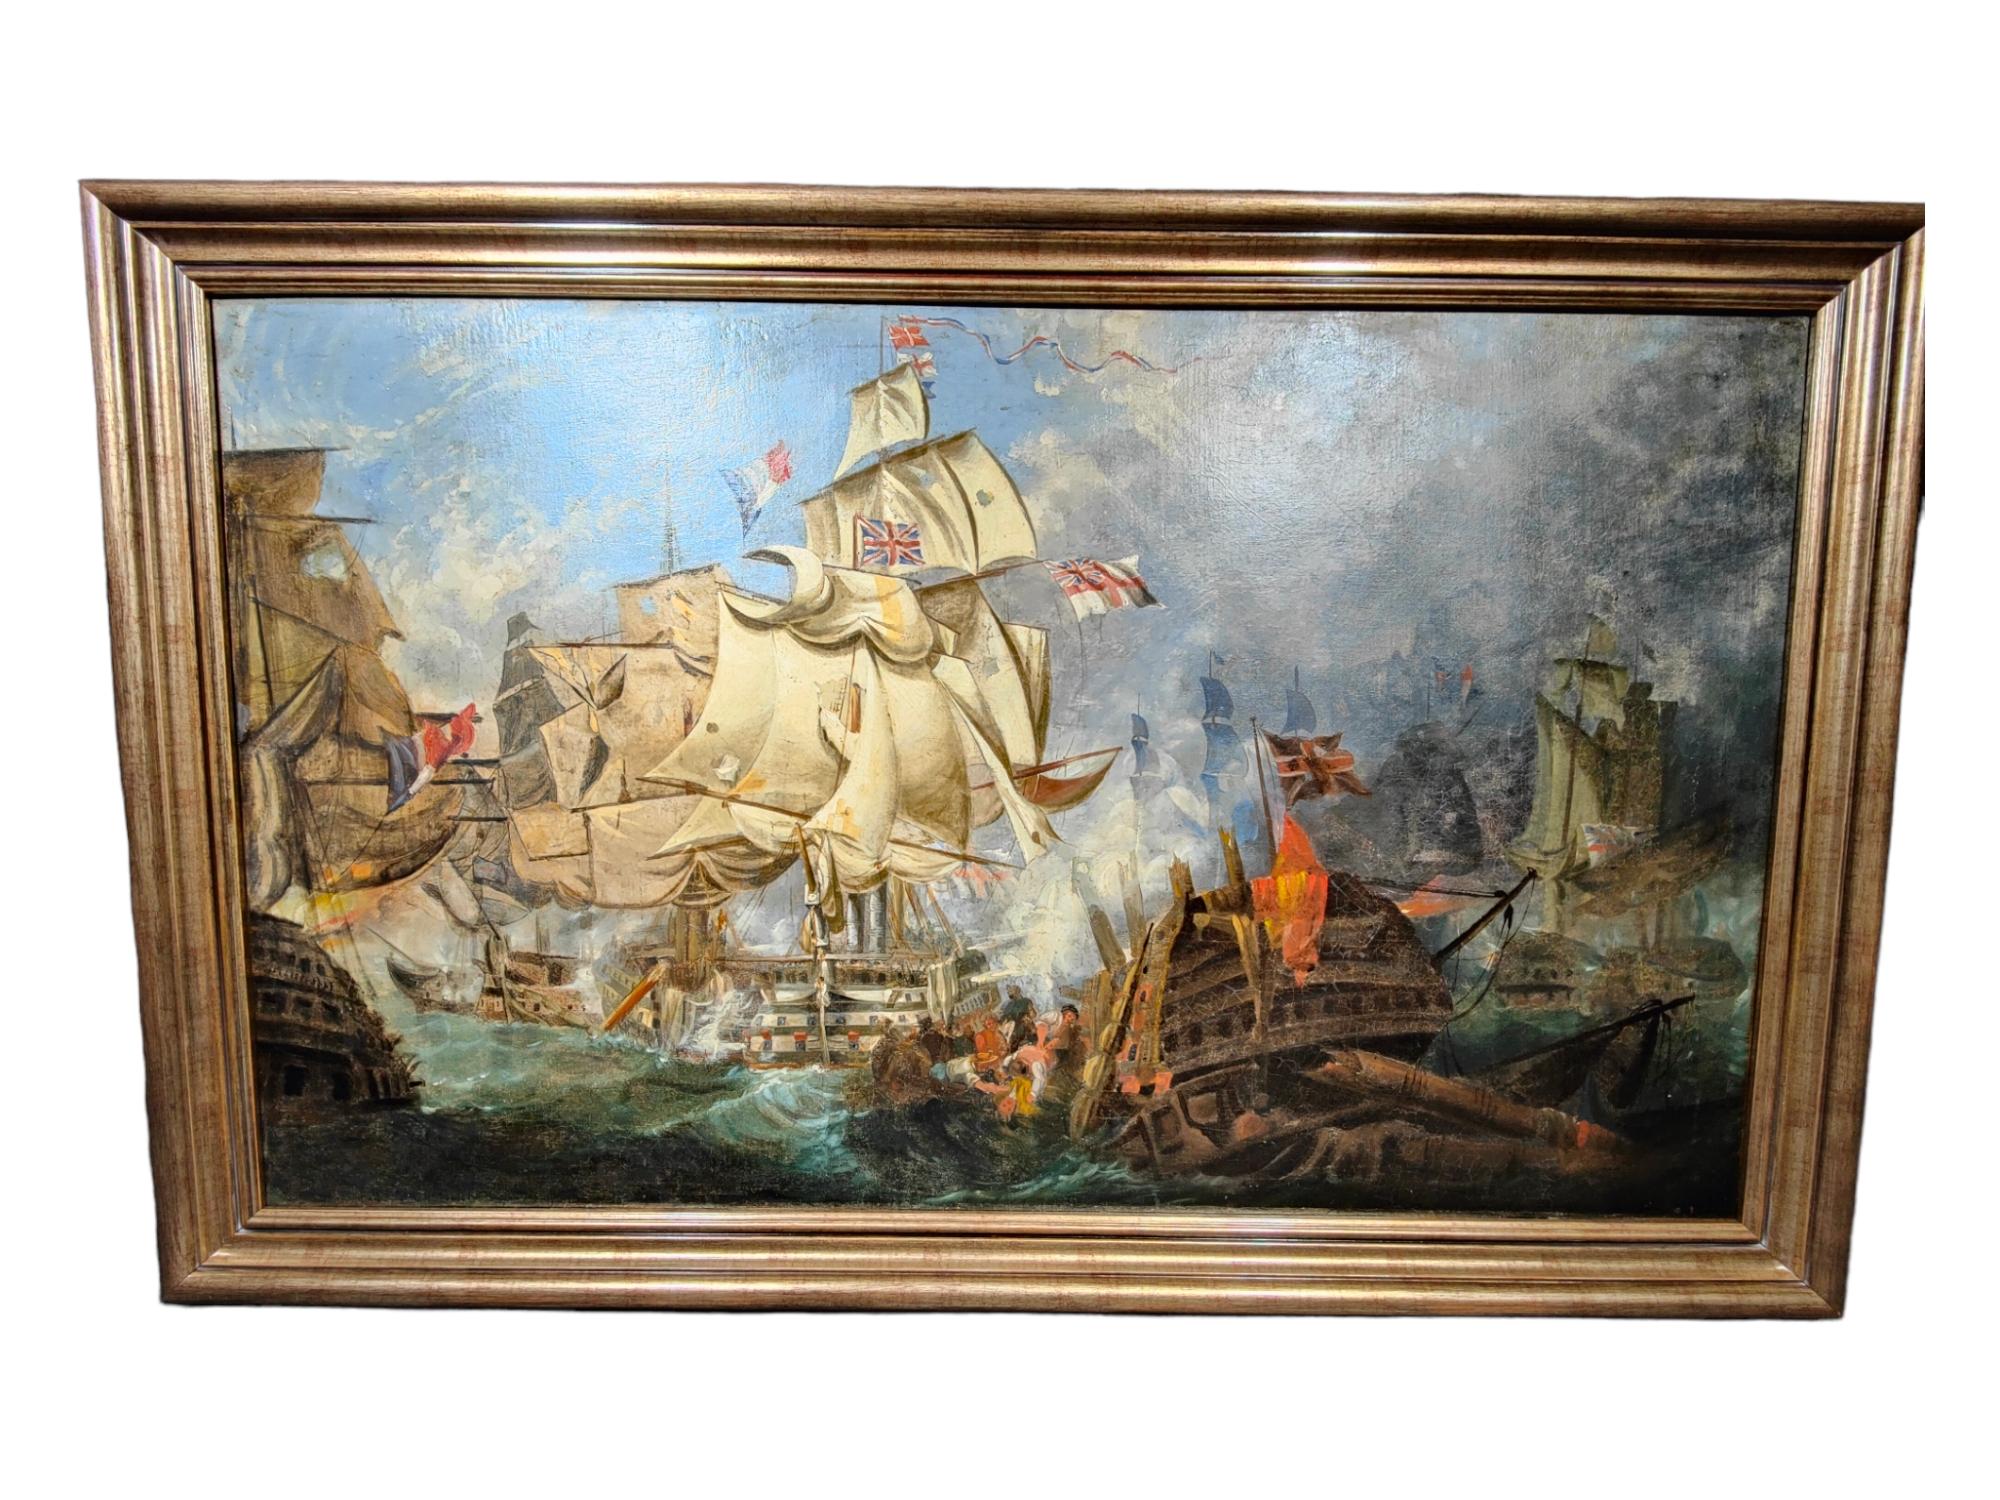 Oil On Canvas With The Battle Of Trafalgar 18th Century
LARGE 18th CENTURY OIL OF THE ENGLISH SCHOOL ON THE BATTLE OF TRAFALGAR.VERY GOOD QUALITY WITH AN EXCELLENT PERSPECTIVE AND A SCENE WITH A LOT OF MOVEMENT AND ENVELOPING.THE CANVAS IS